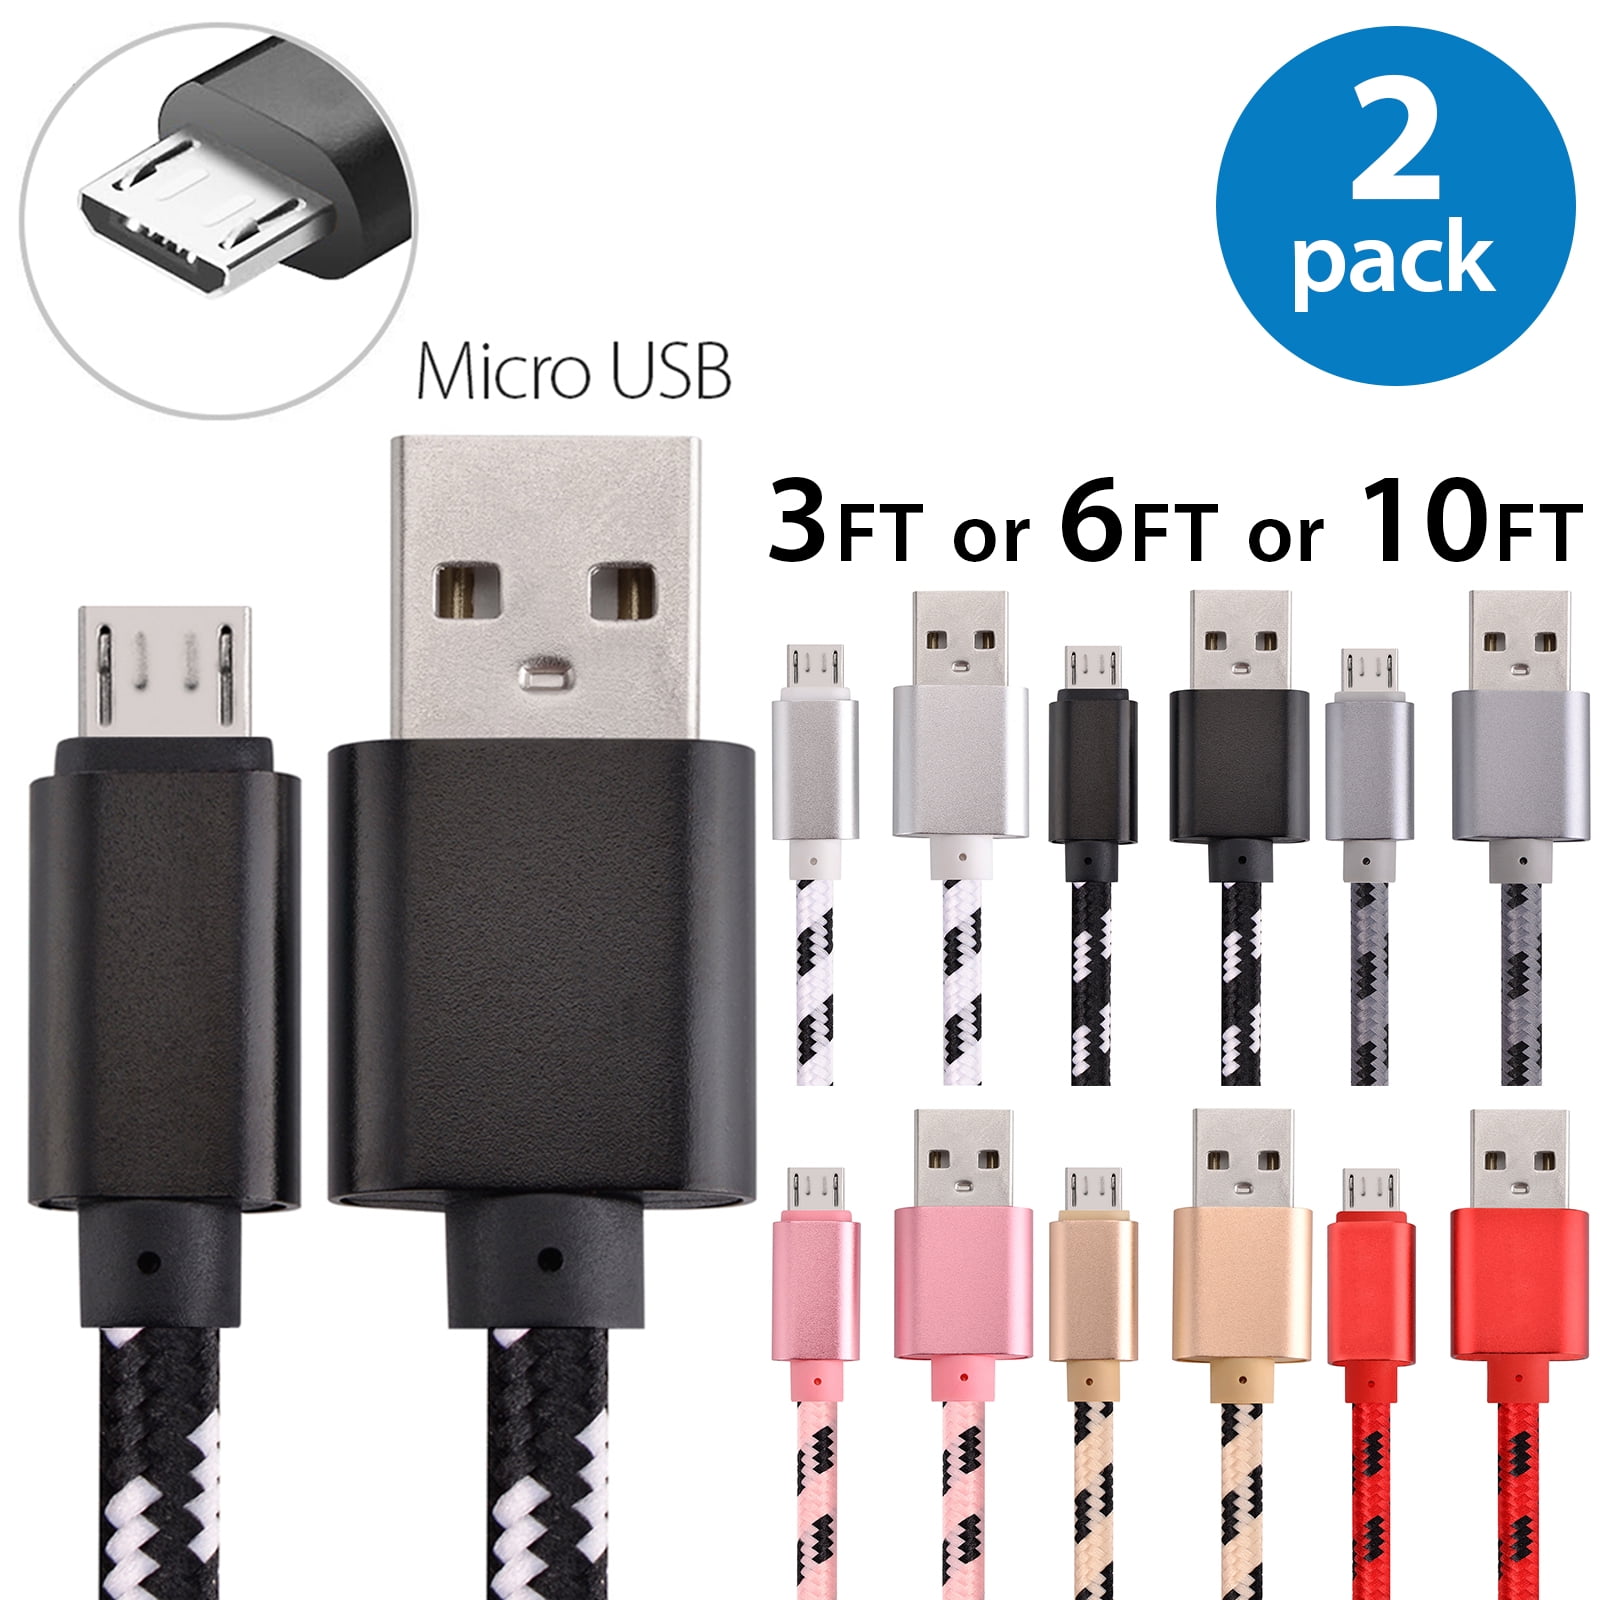 Android Smartphones Micro USB Cable Tablets and More Right Angle Micro Charger Cord for Samsung Galaxy S7 S6 Edge Android Charger 5-Pack 3FT Kindle 